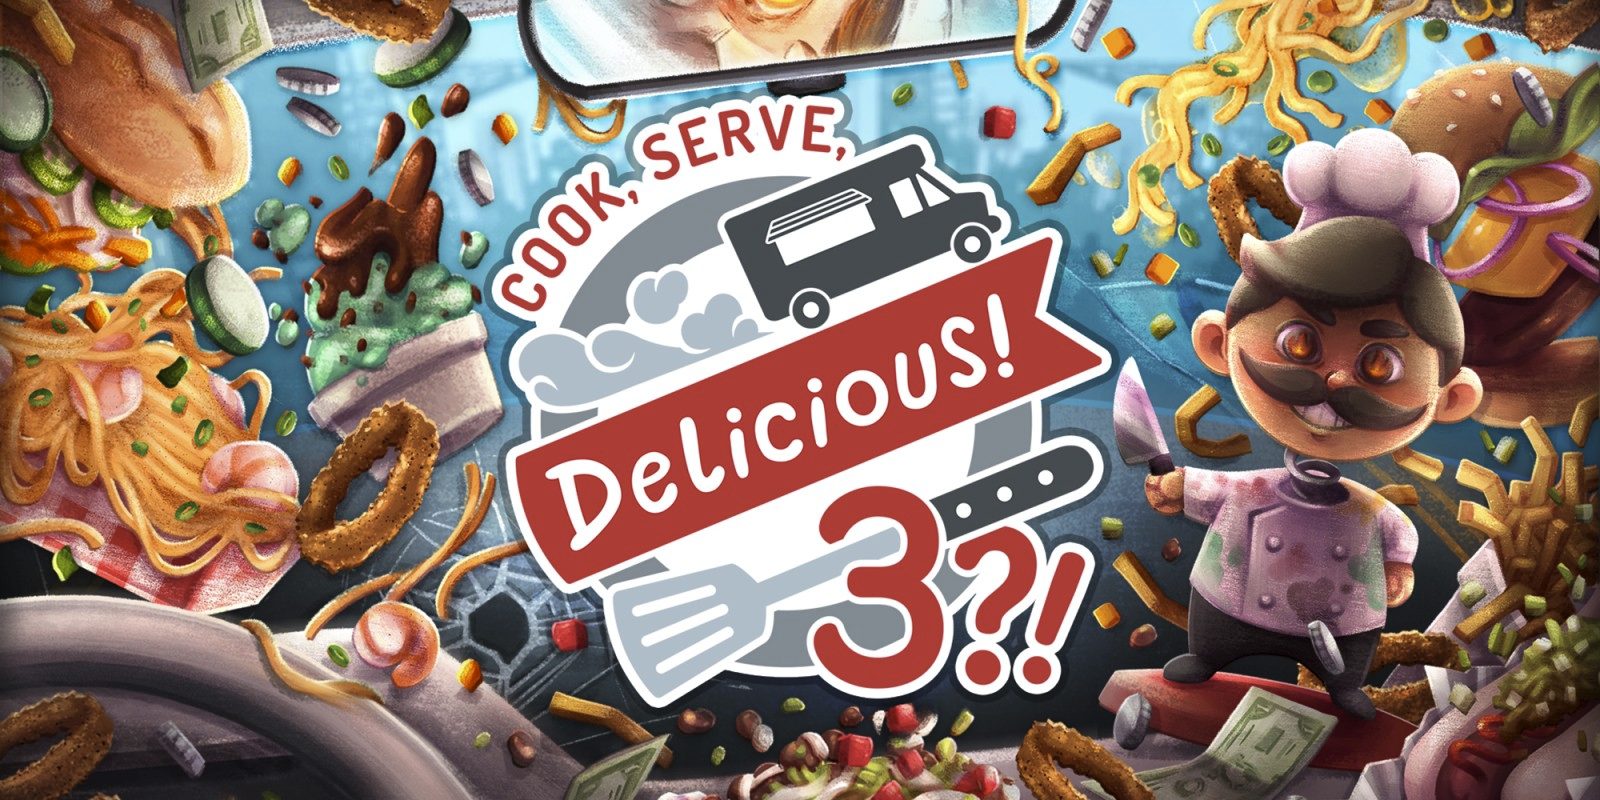 Epic Games Store, unrailed!, Cook, Serve, Delicious! 3?!,